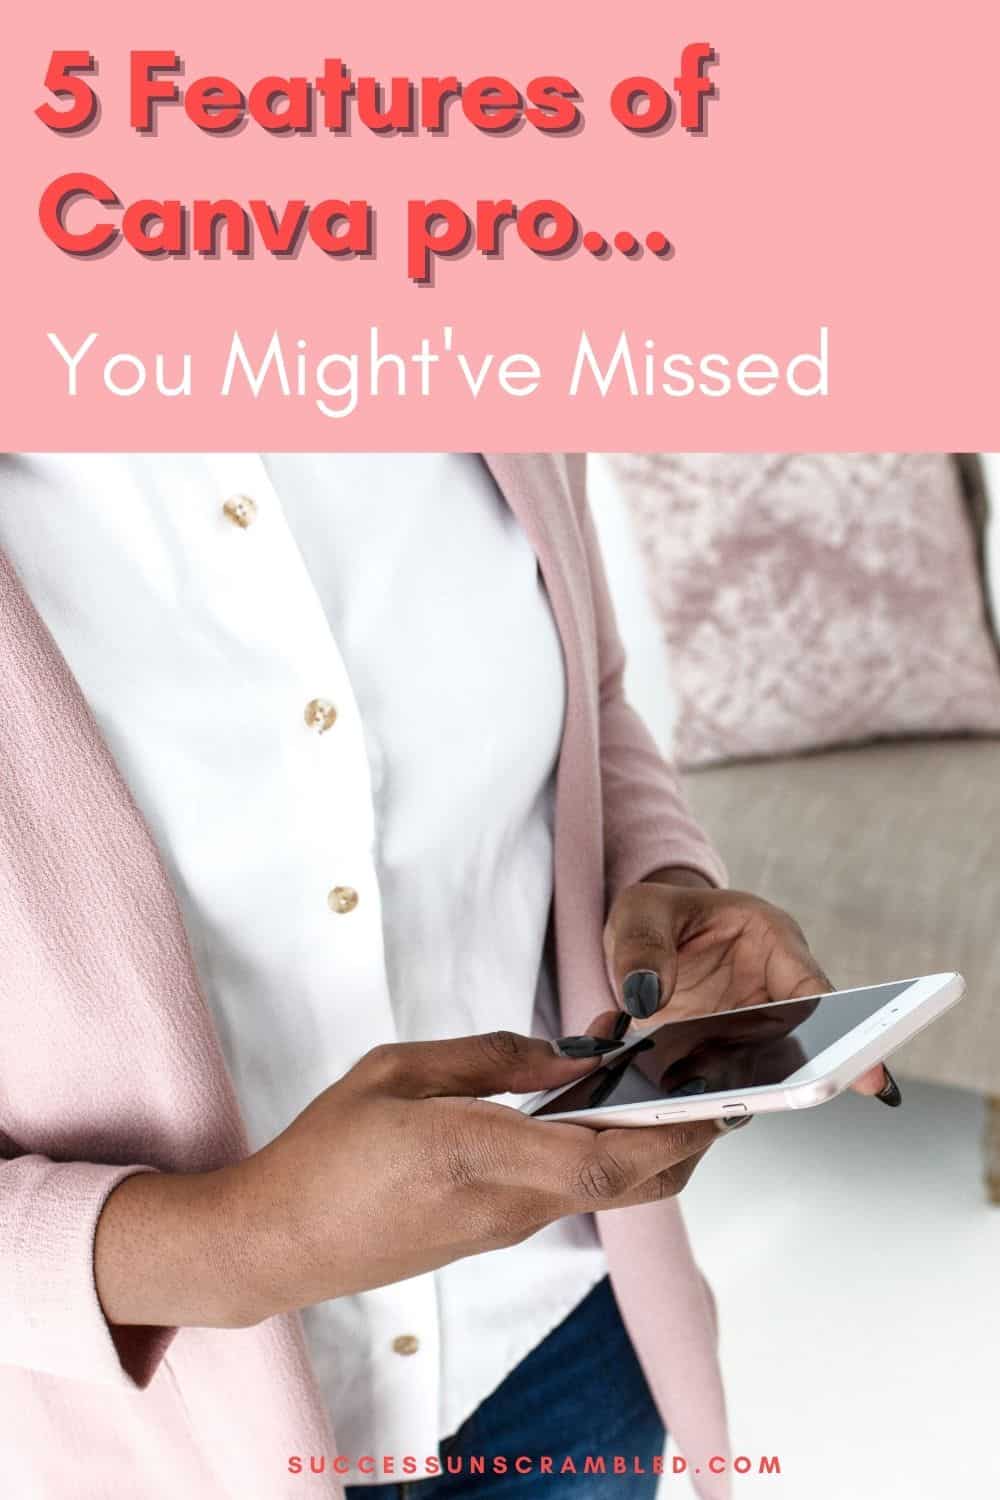 photo of woman in a pink jacket holding a smartphone